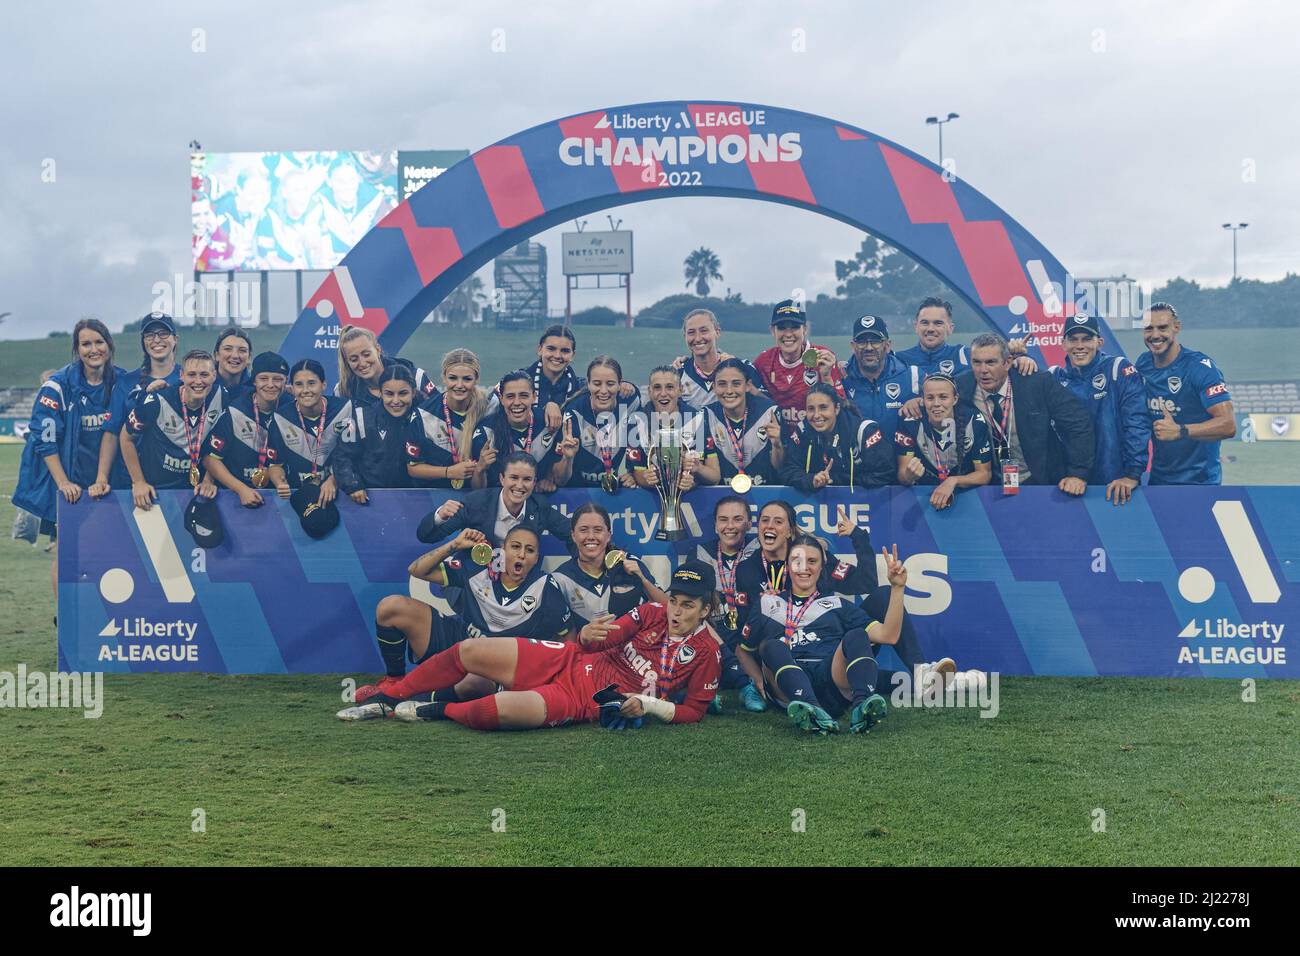 The Melbourne Victory players and staff celebrate during the presentation ceremony after winning the Womens Liberty A-League Grand Final match between Stock Photo